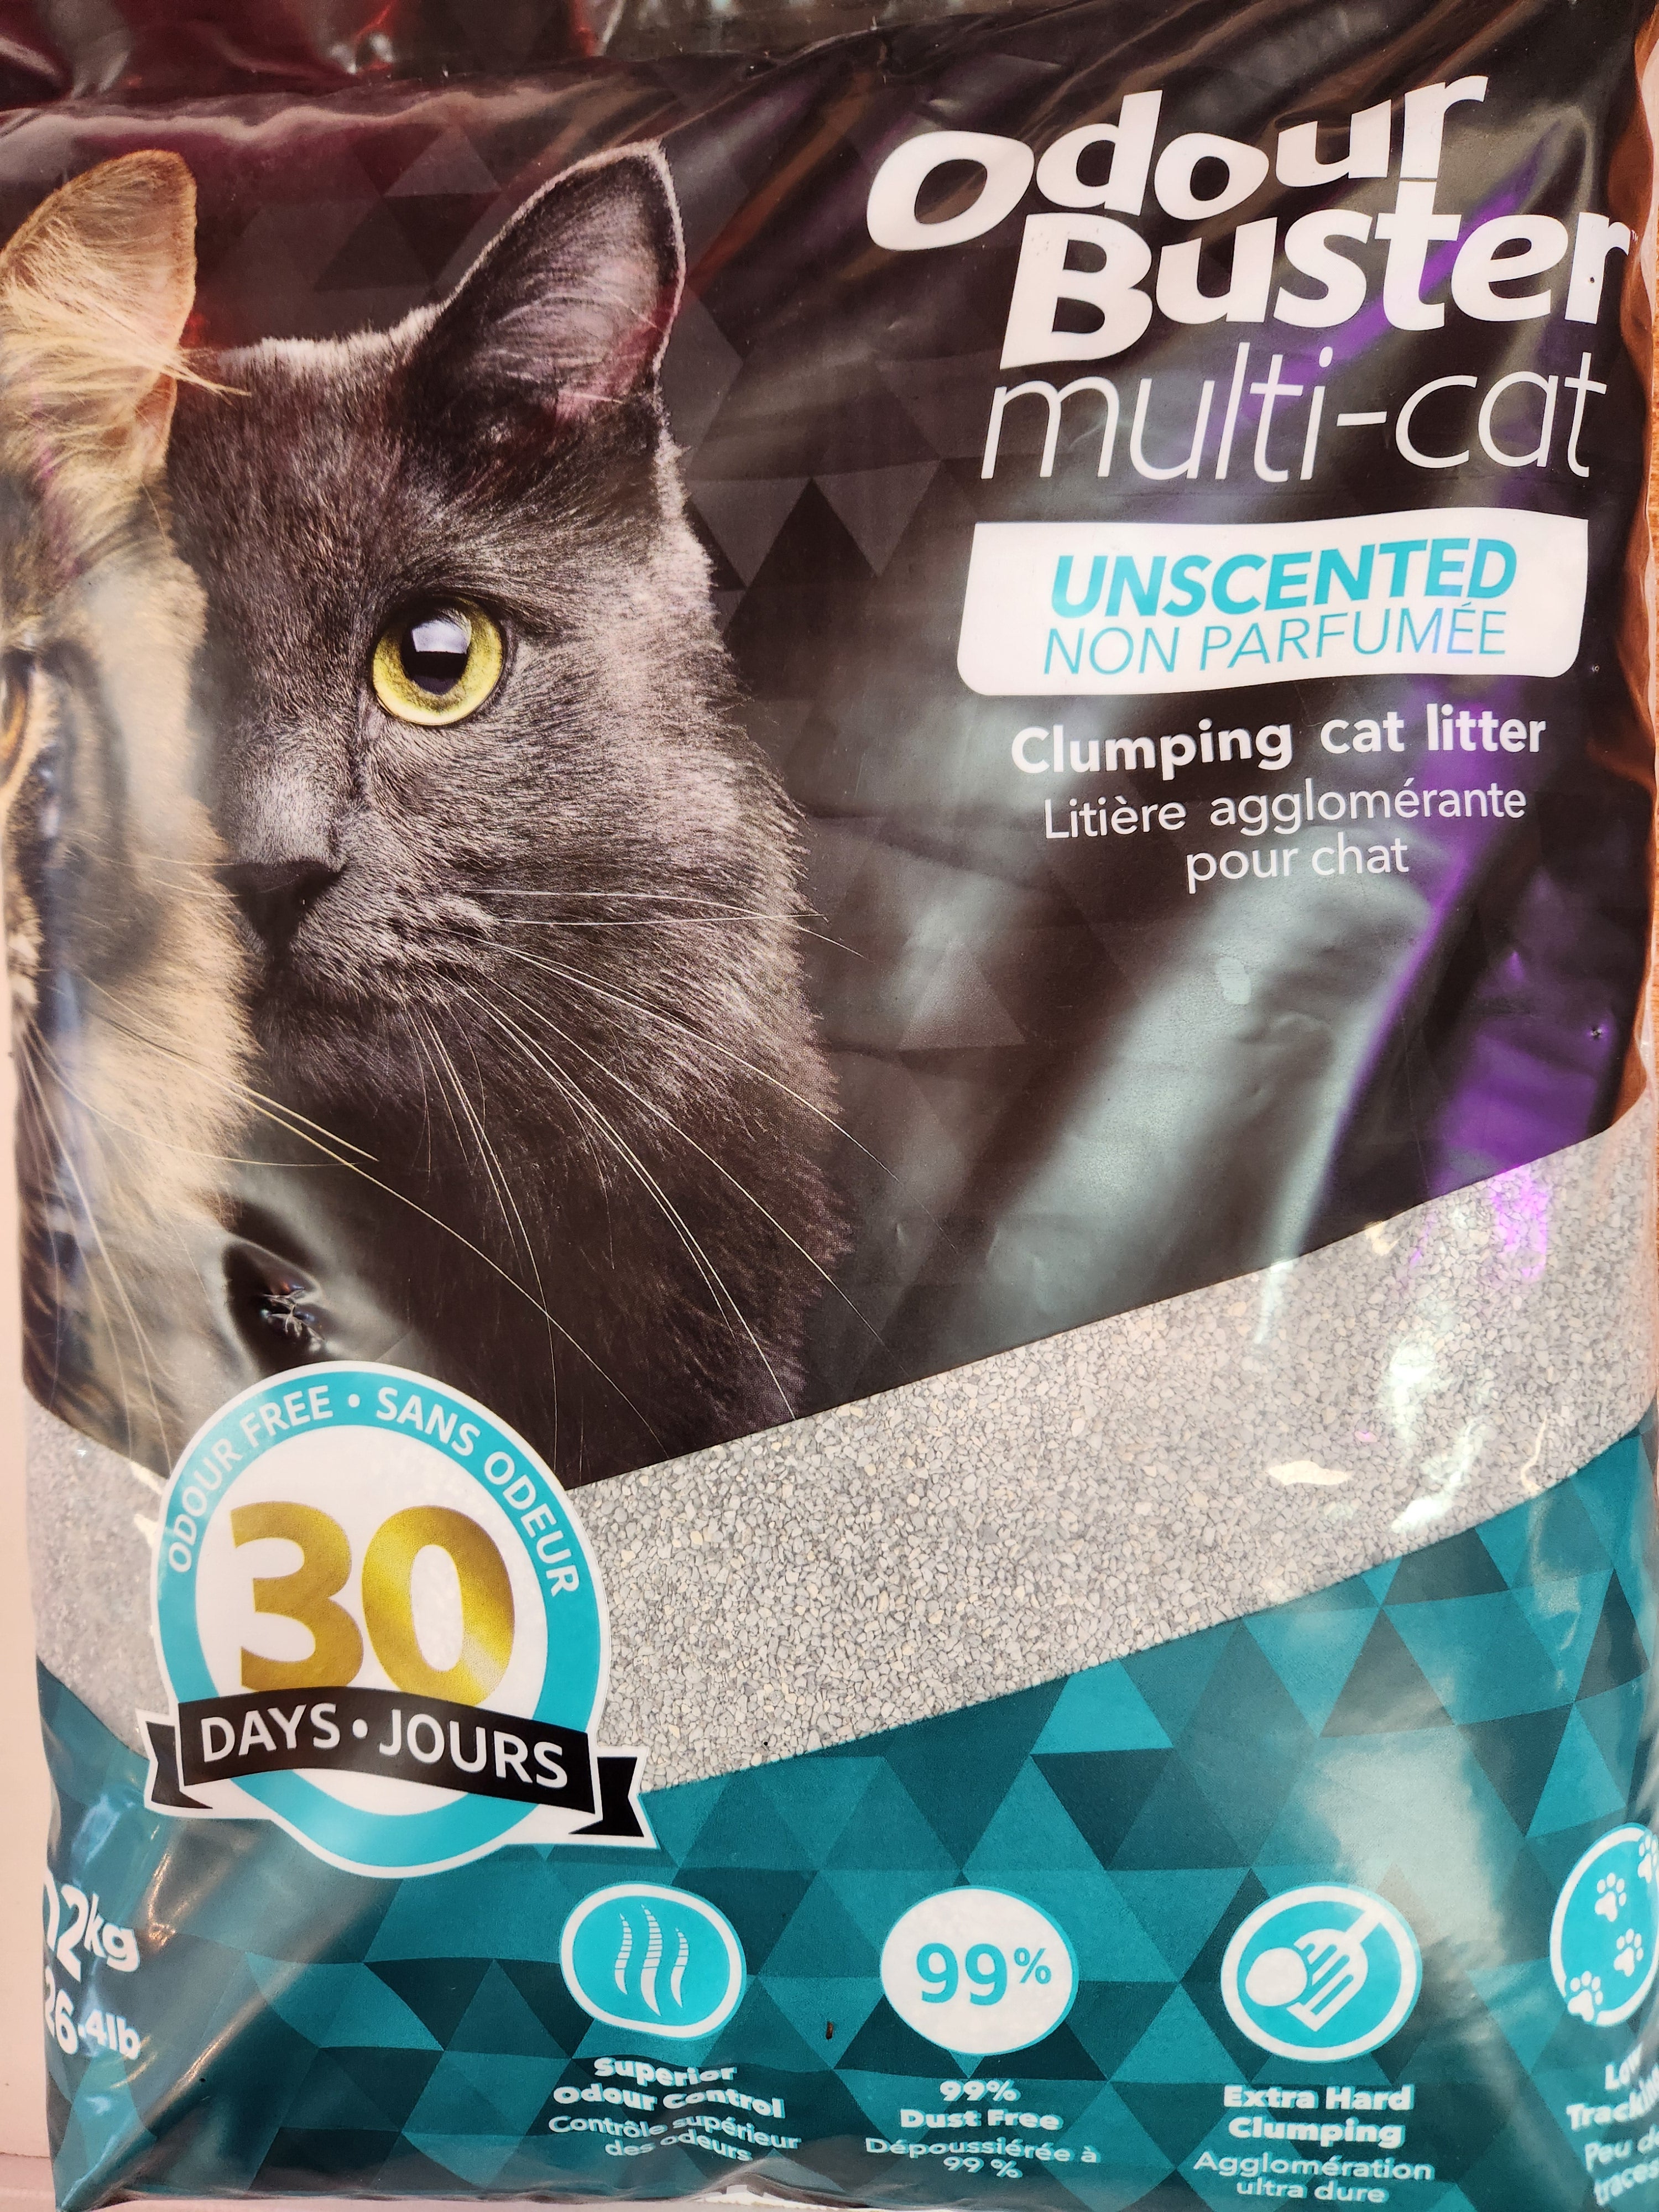 Odour Buster Multi-Cat Unscented Clumping Cat Litter 12kg